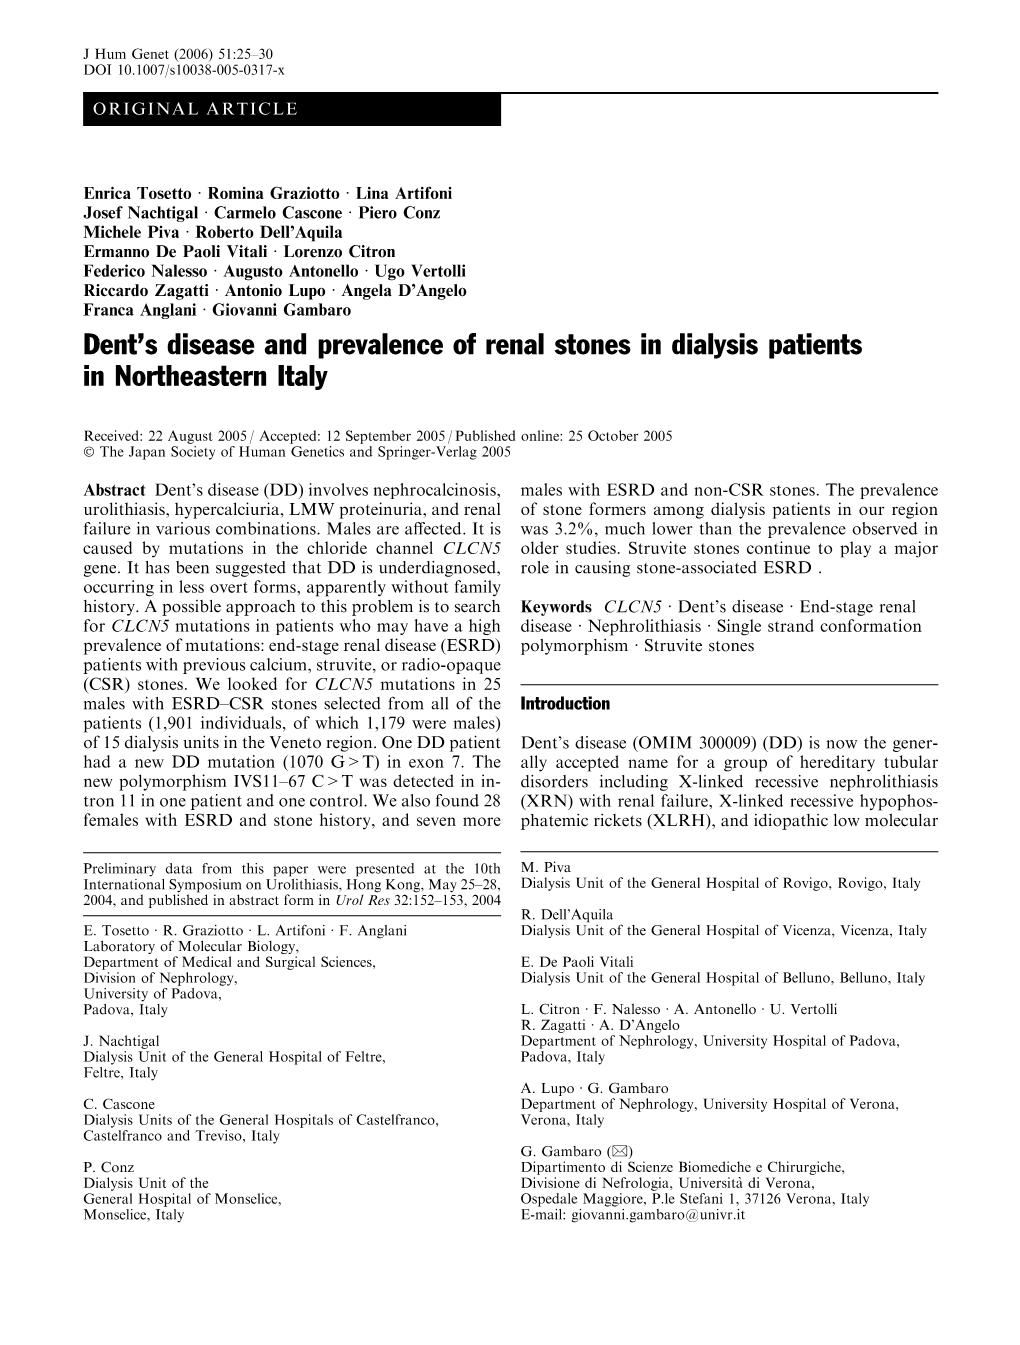 Dent's Disease and Prevalence of Renal Stones in Dialysis Patients In